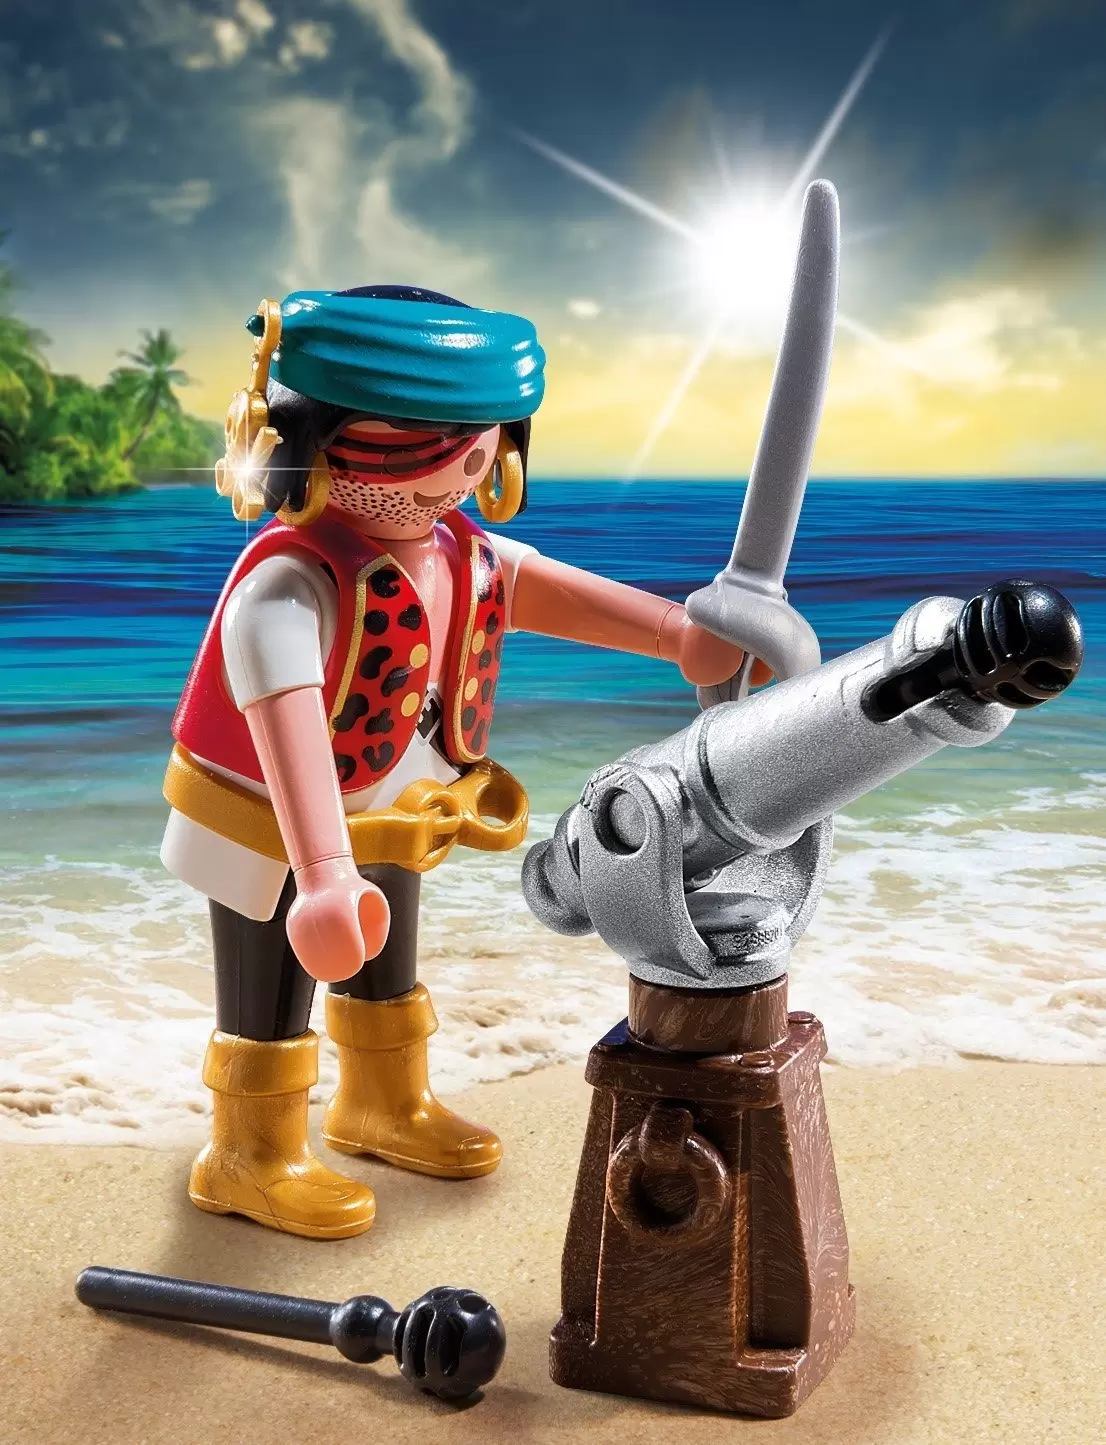 Playmobil SpecialPlus - Pirate with Cannon